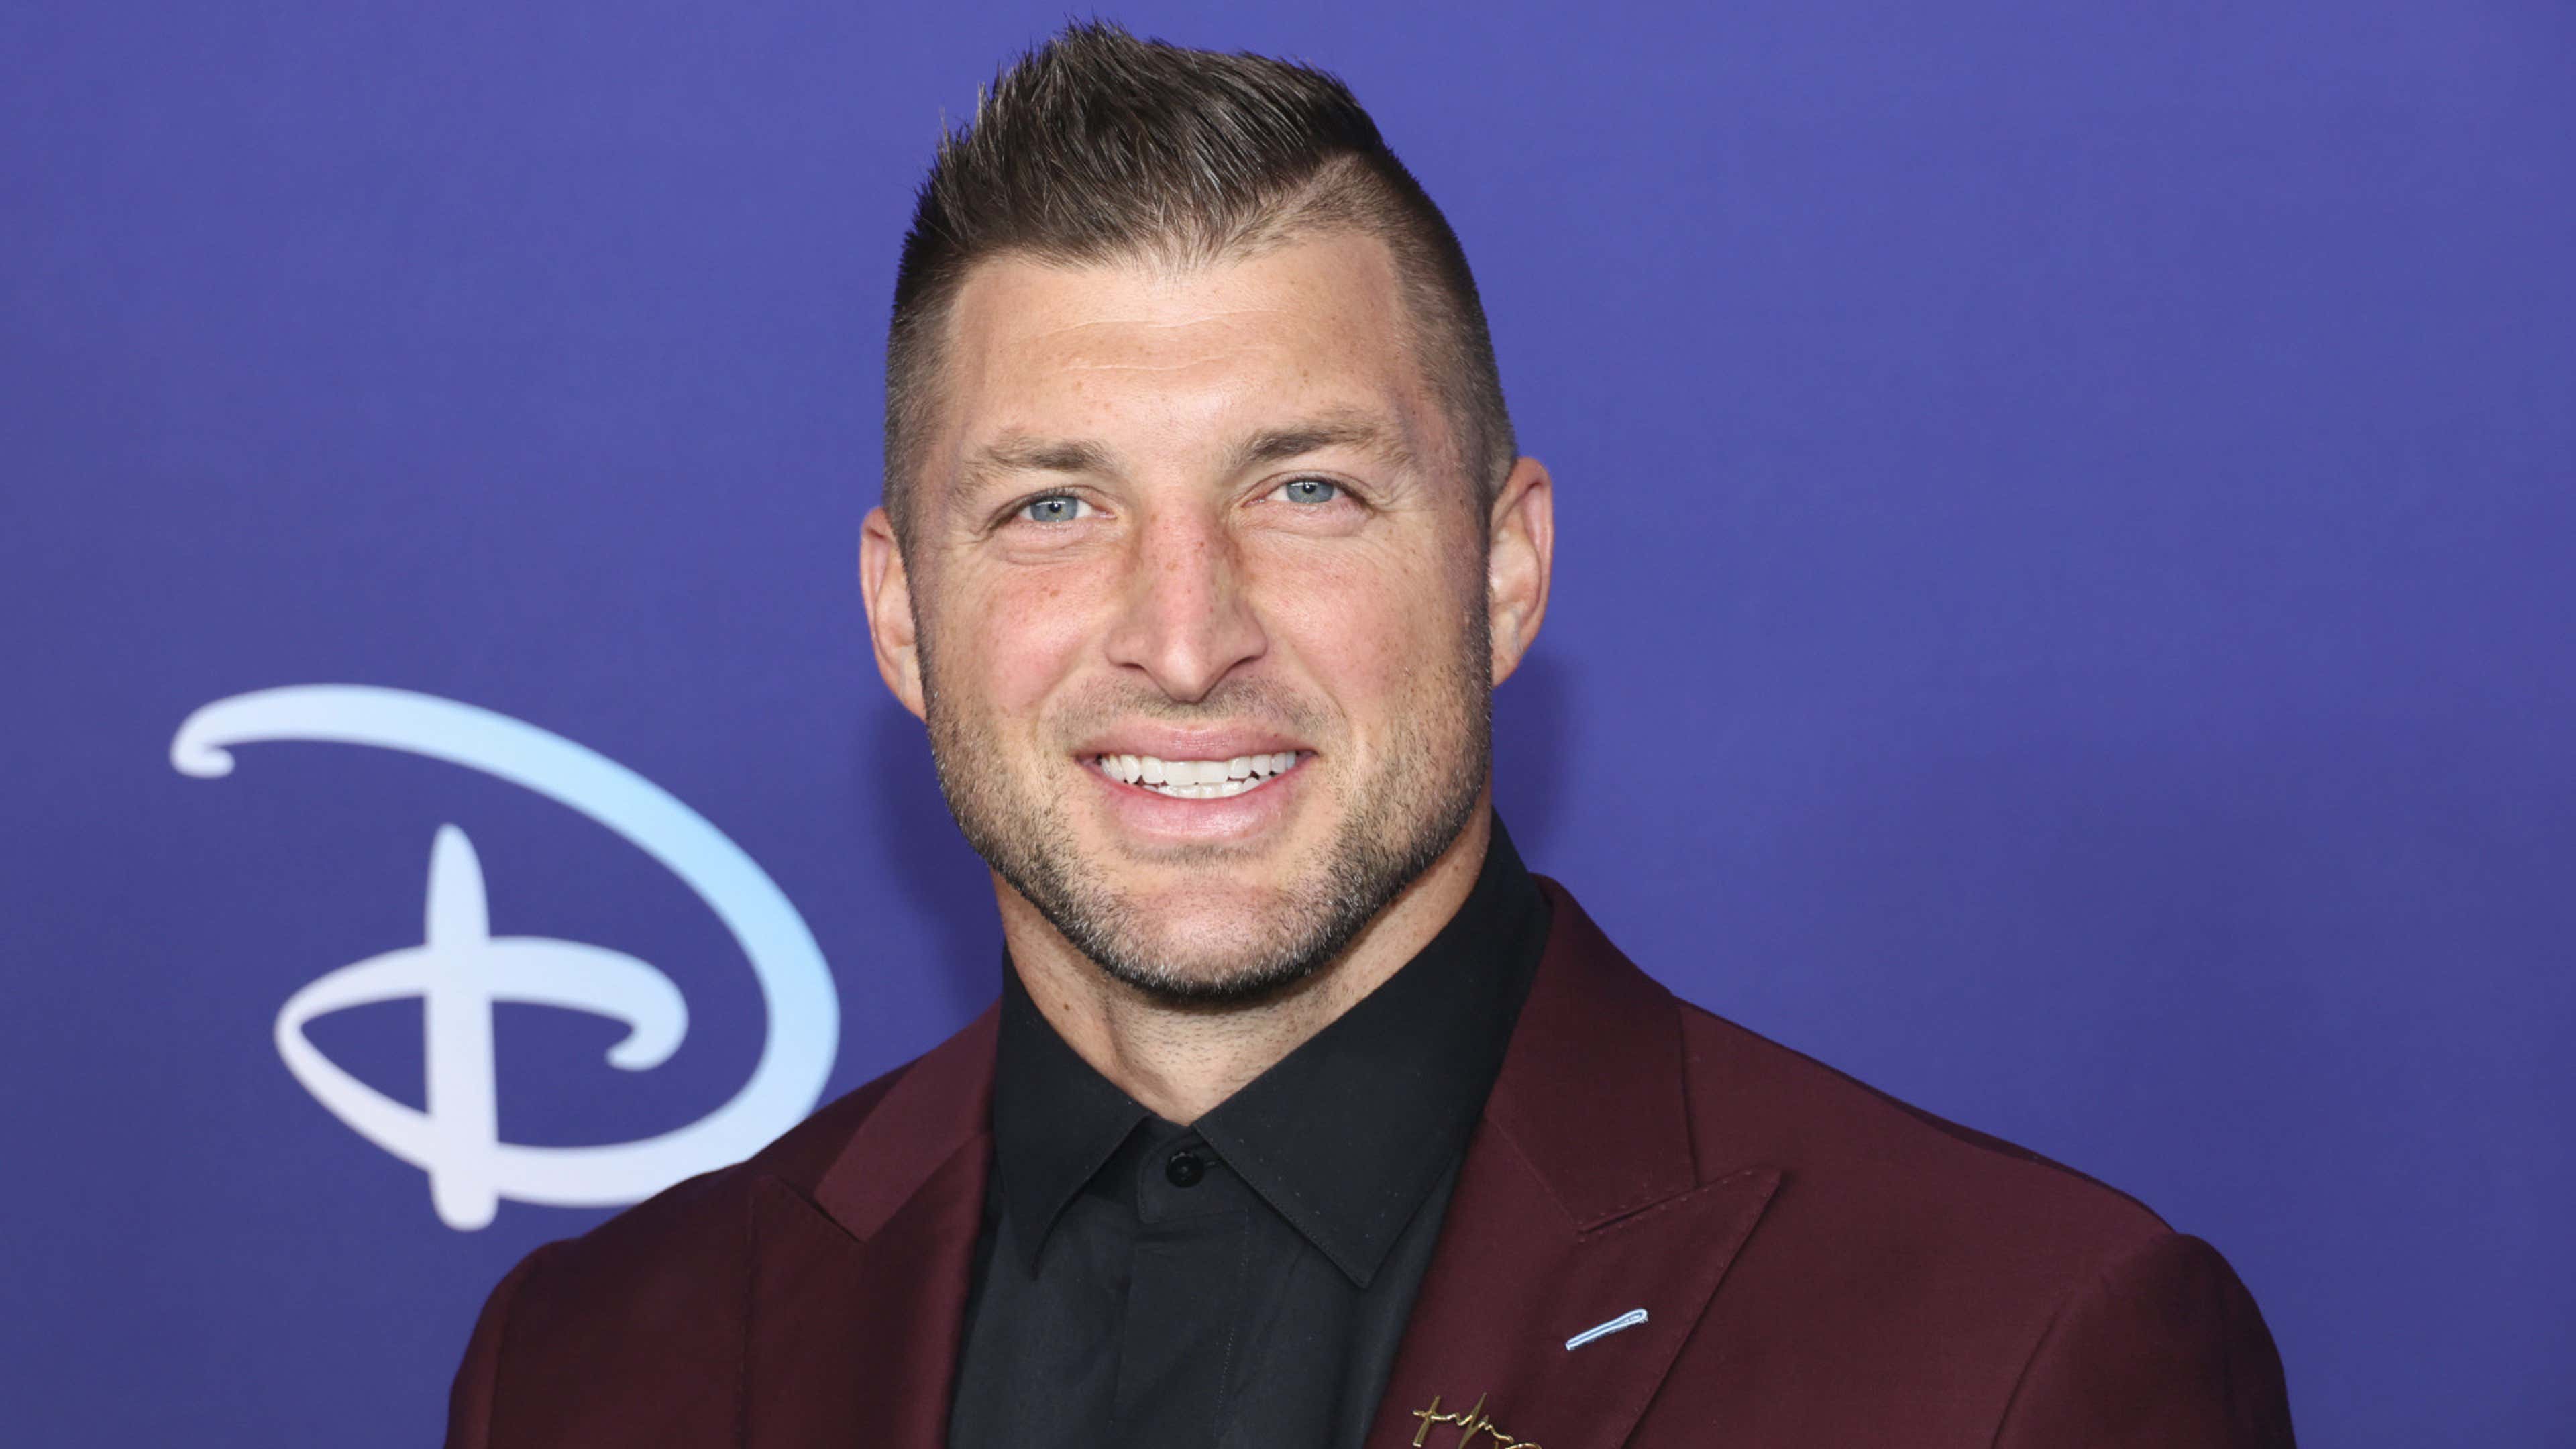 Ex-NFL star Tim Tebow invests in USL expansion club